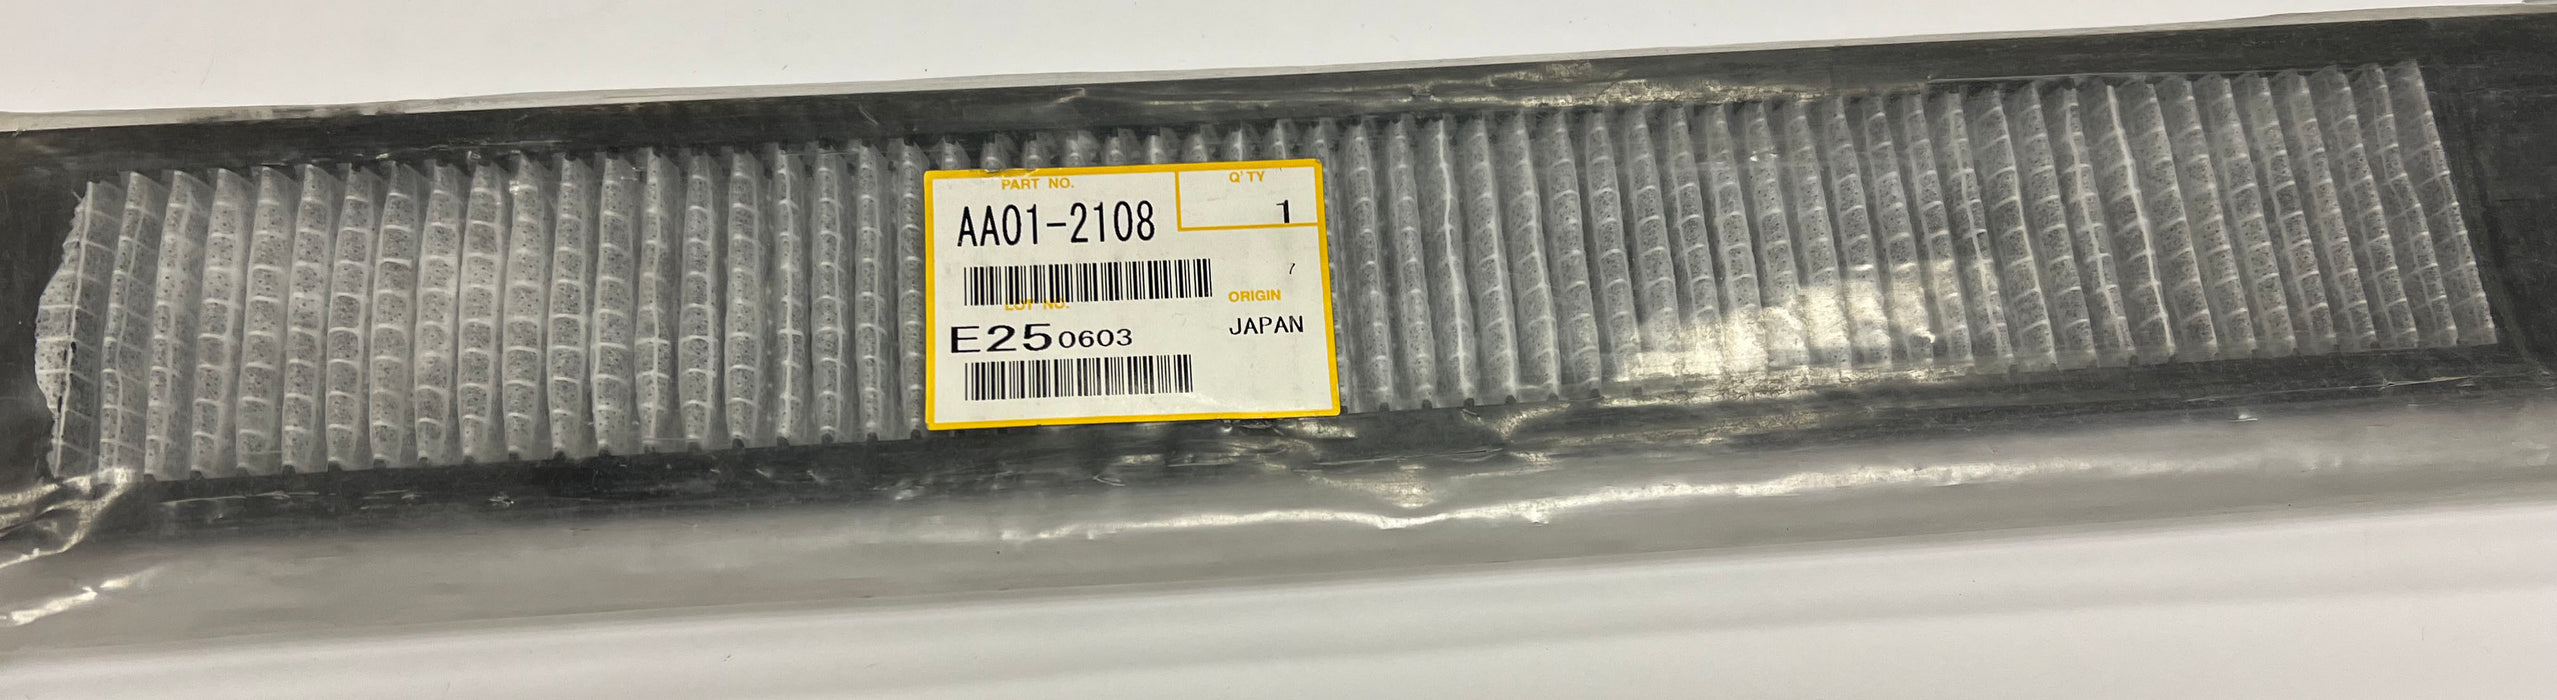 Genuine Ricoh Spare Parts | AA01-2108